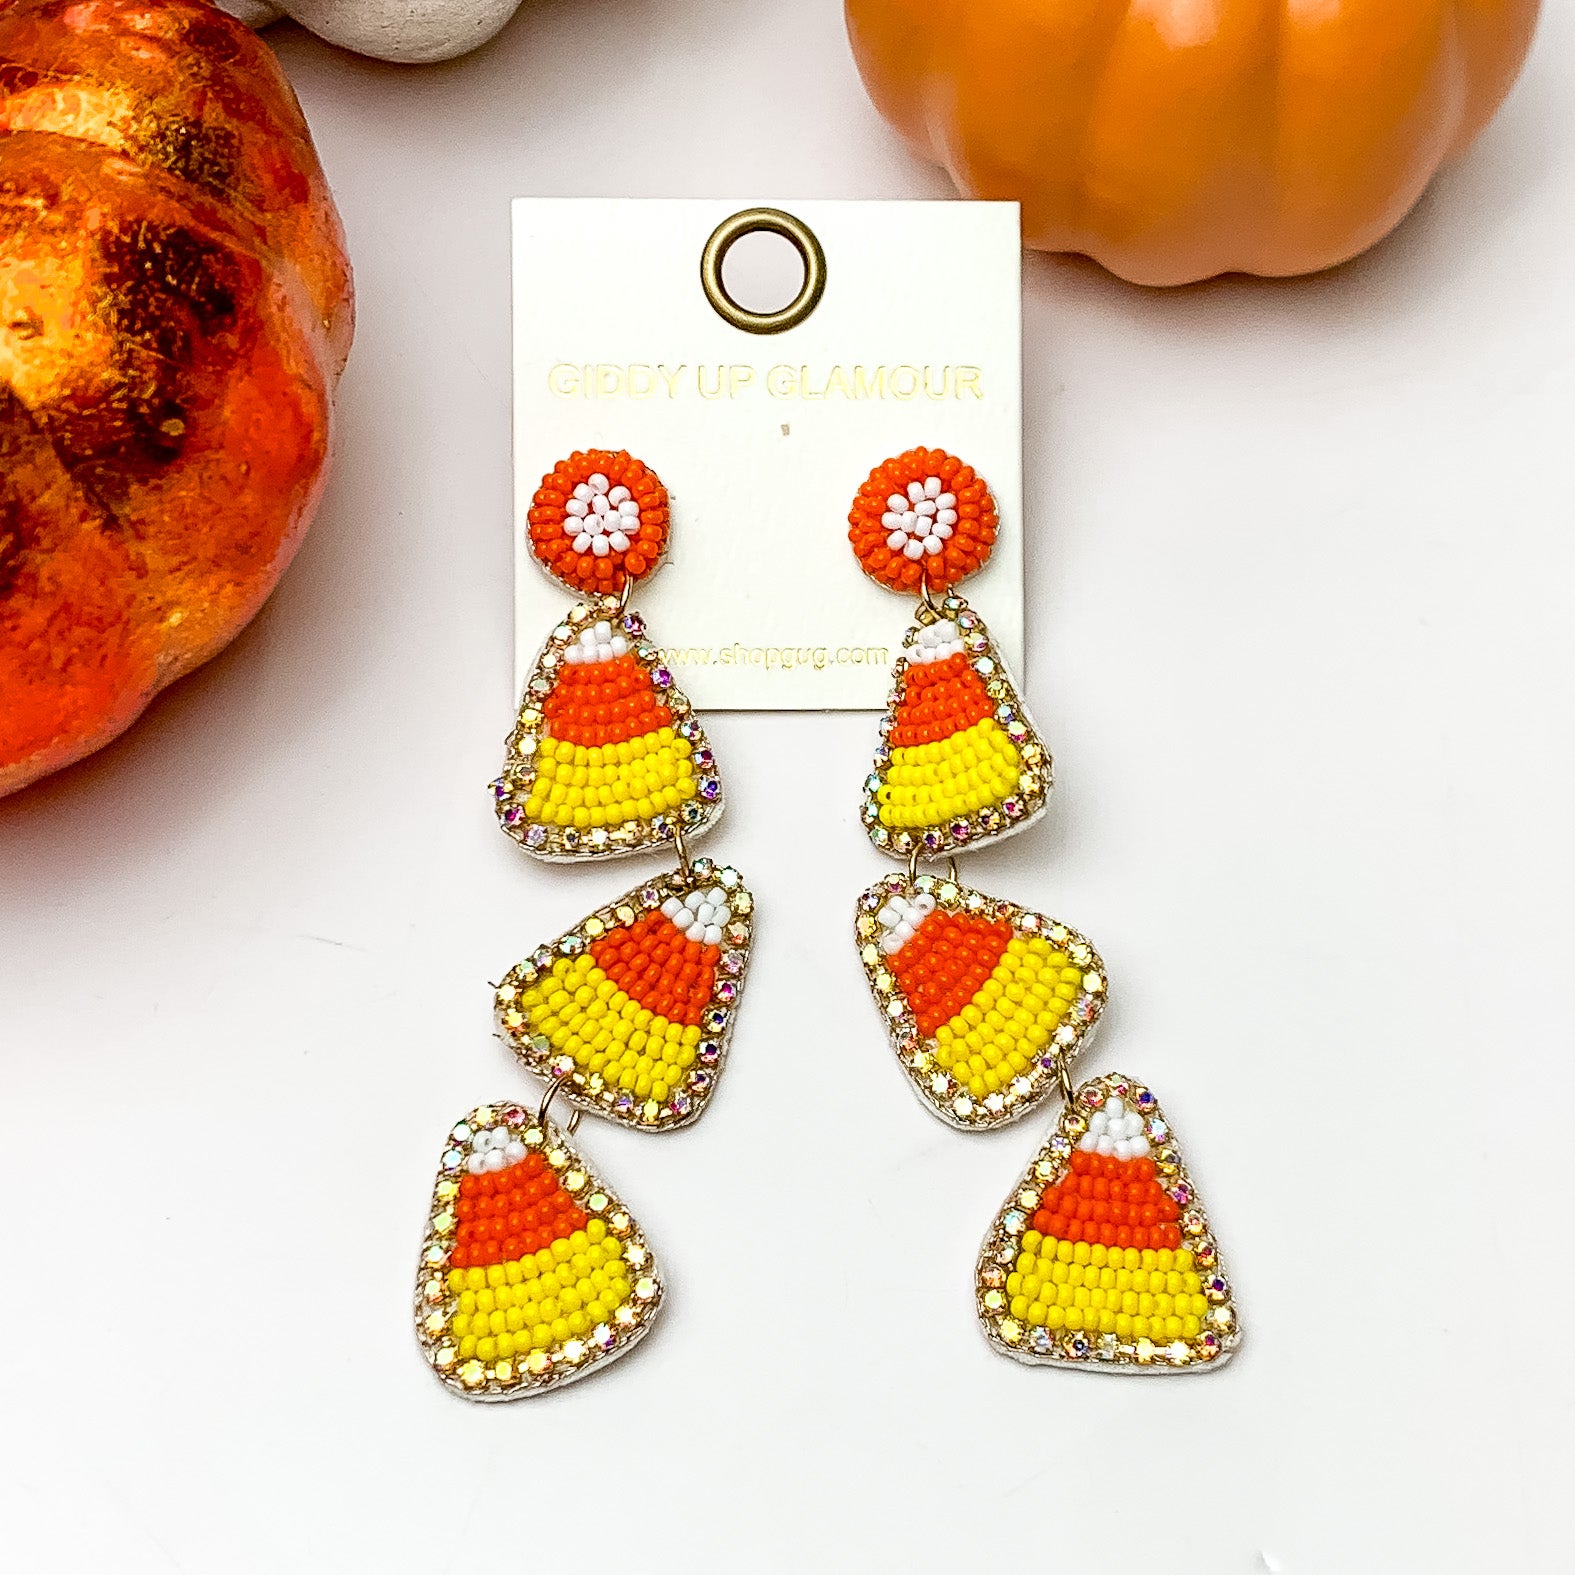 Beaded Candy Corn Drop Earrings with AB Crystal Outline in Orange and Yellow